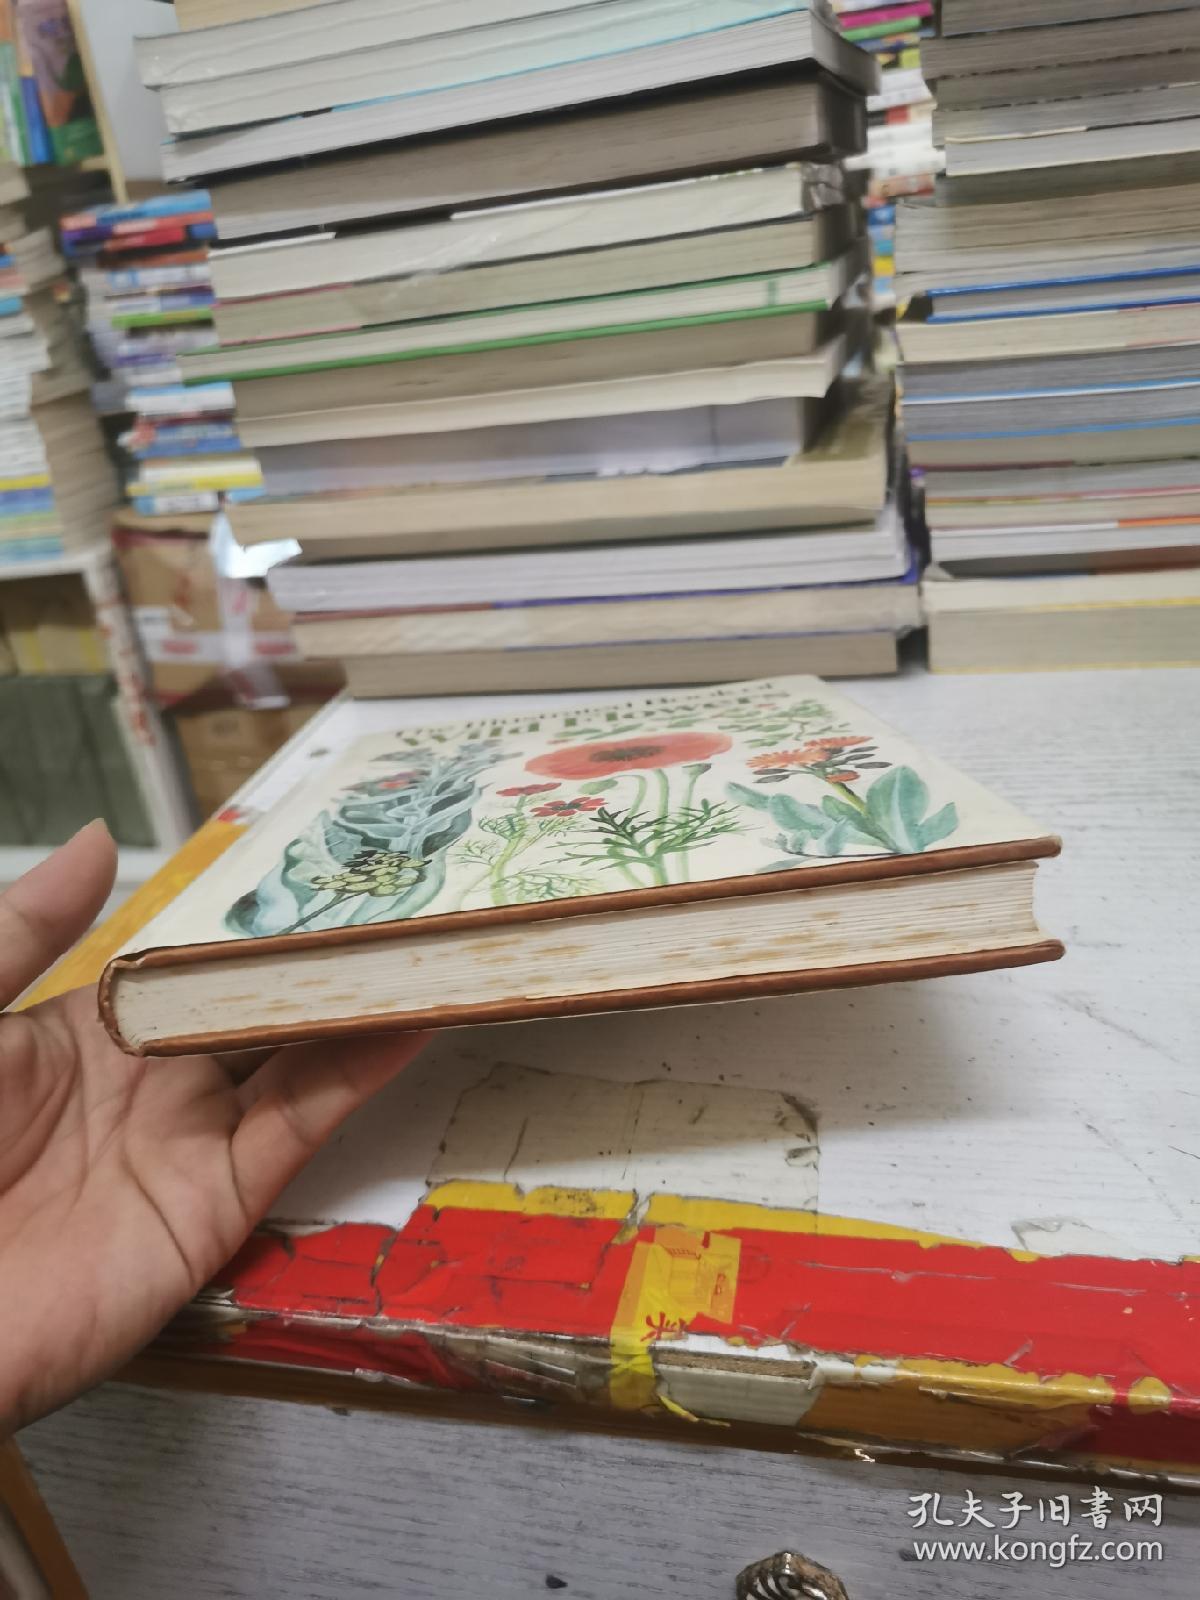 The Iiiustrated Book of Wild flowers